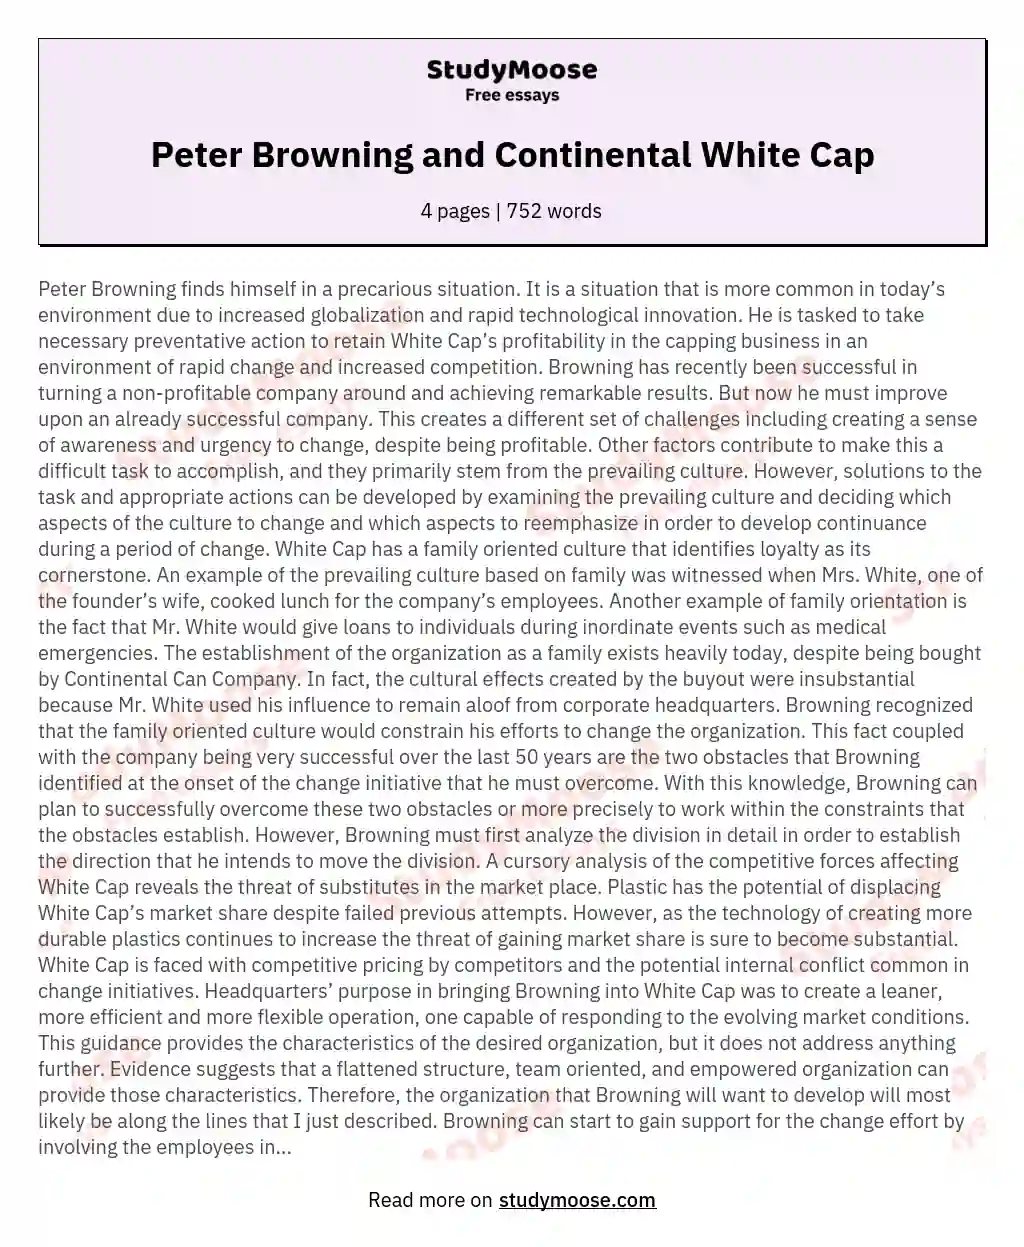 Peter Browning and Continental White Cap